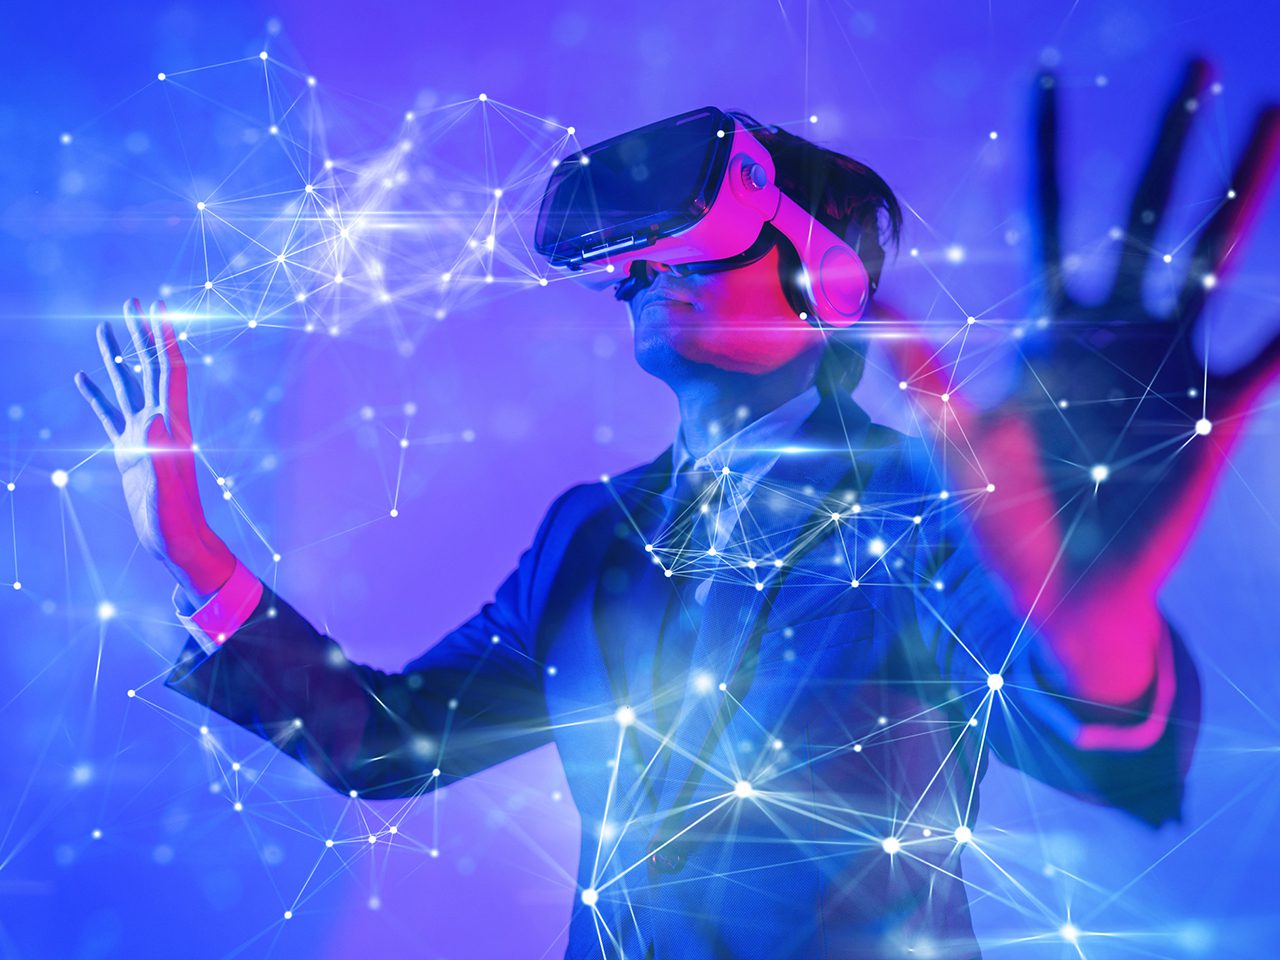 Metaverse digital cyberworld technology, man with VR virtual reality glasses playing AR augmented reality games and entertainment, futuristic lifestyle